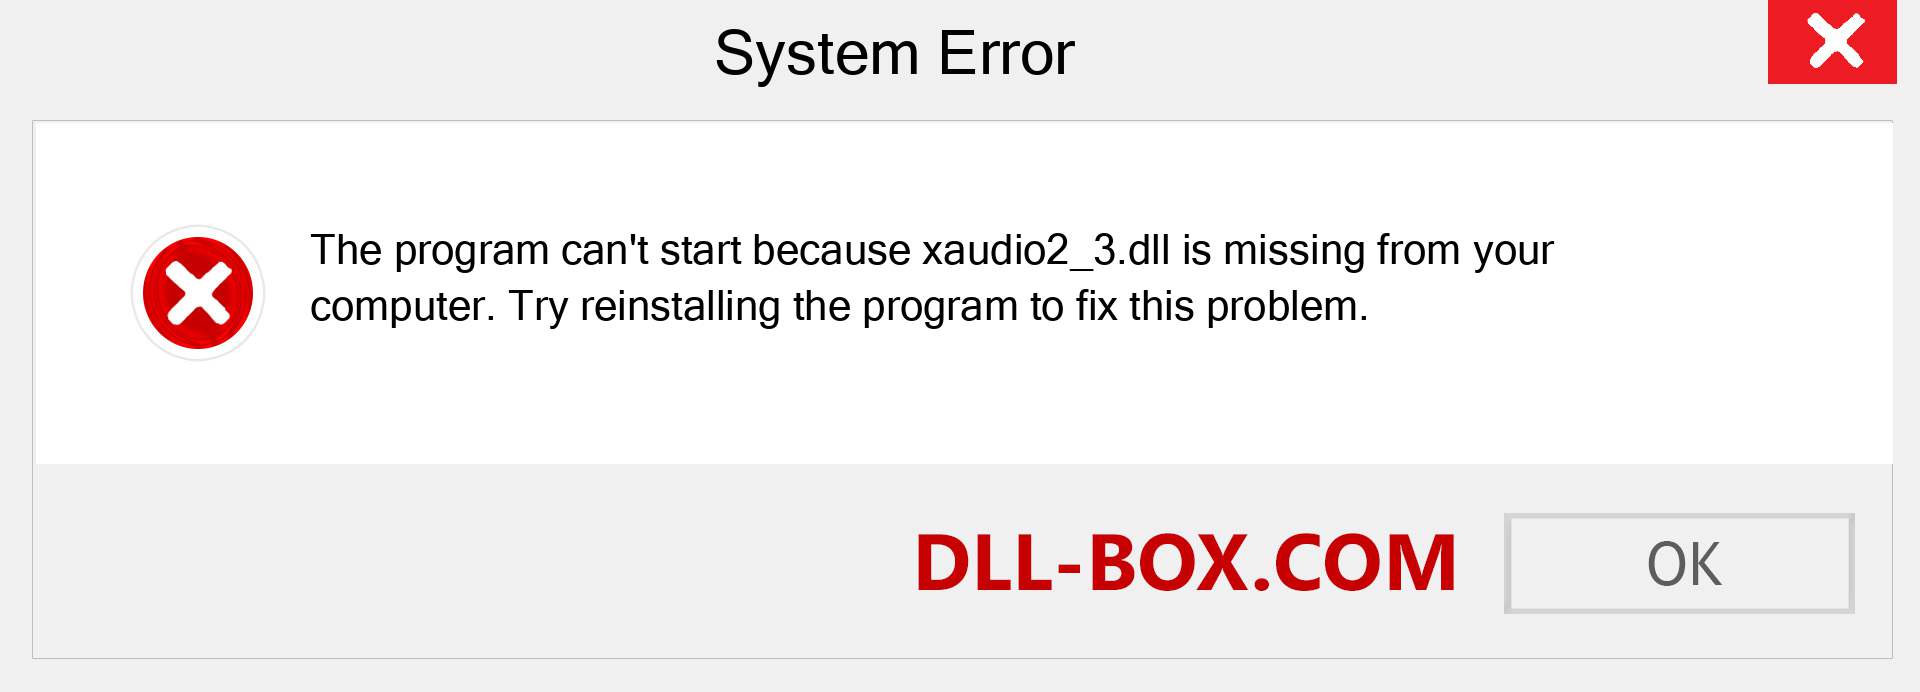  xaudio2_3.dll file is missing?. Download for Windows 7, 8, 10 - Fix  xaudio2_3 dll Missing Error on Windows, photos, images